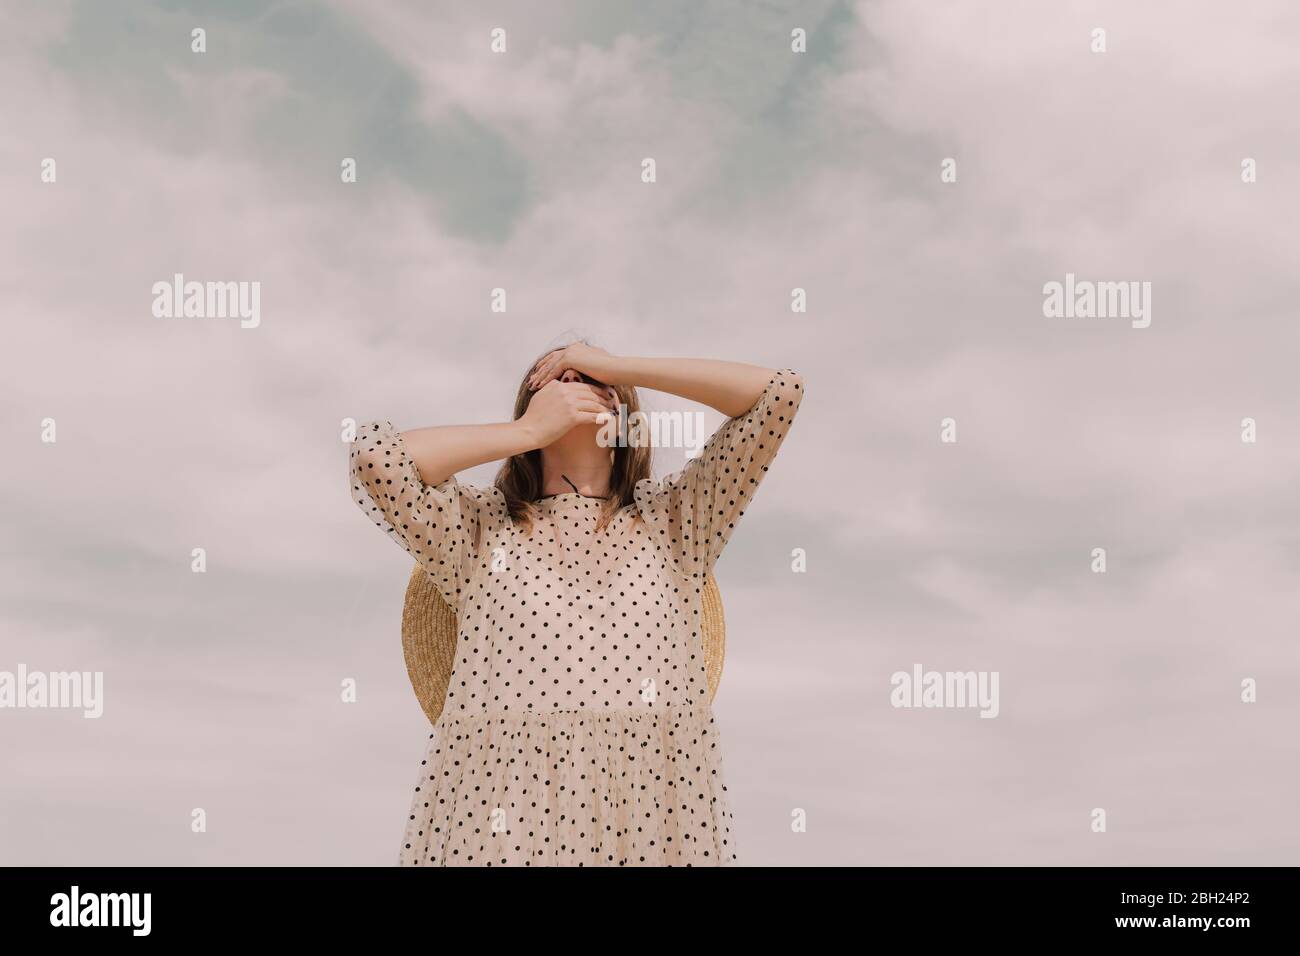 Woman in vintage dress covering her eyes and mouth Stock Photo